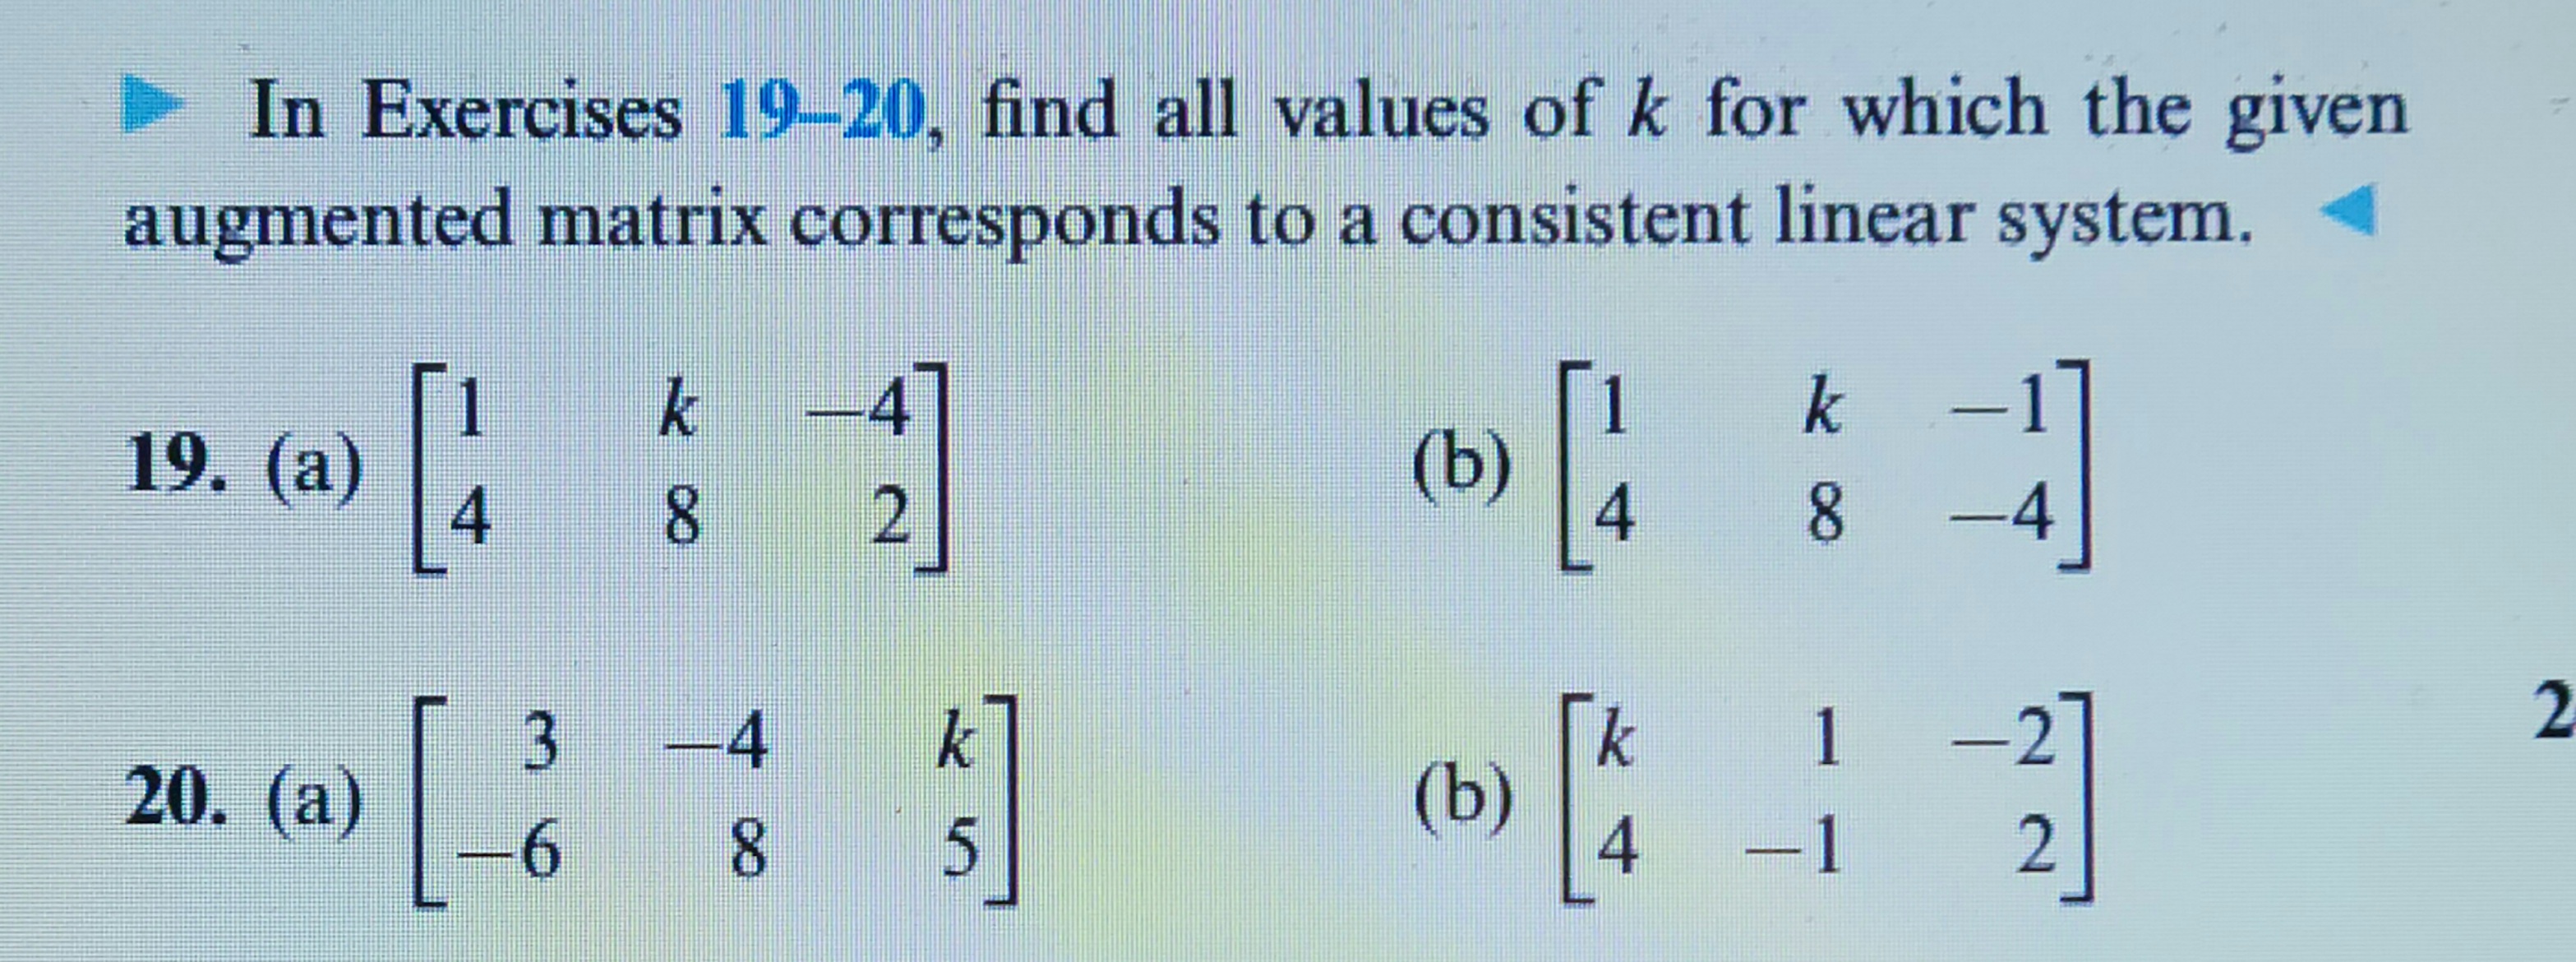 In Exercises 19-20, find all values of k for which the given
augmented matrix corresponds to a consistent linear system.
19. (a)
20. (a)
4
3
6
k
8 2
-4
8
k
s]
5
(b)
4
(b) [4
k
8
-1
1
—
–4
2]
2